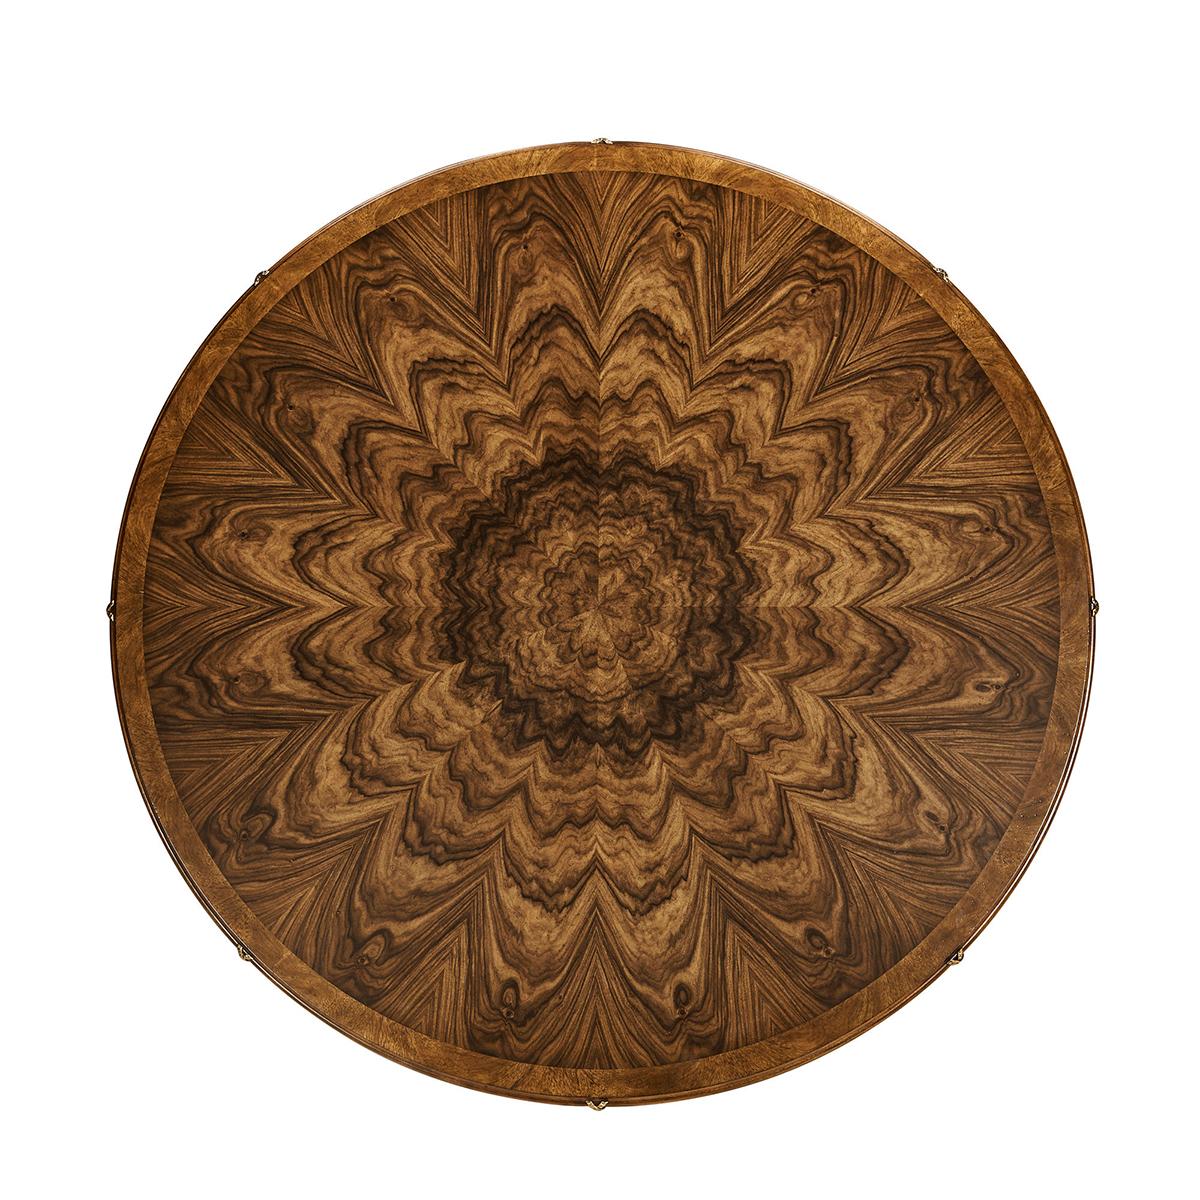 This exquisite Regency-style table combines historical charm with contemporary flair, making it a wonderful addition to any dining space.

Crafted with a radial veneer pattern, the table showcases a beautifully intricate wood grain that draws all